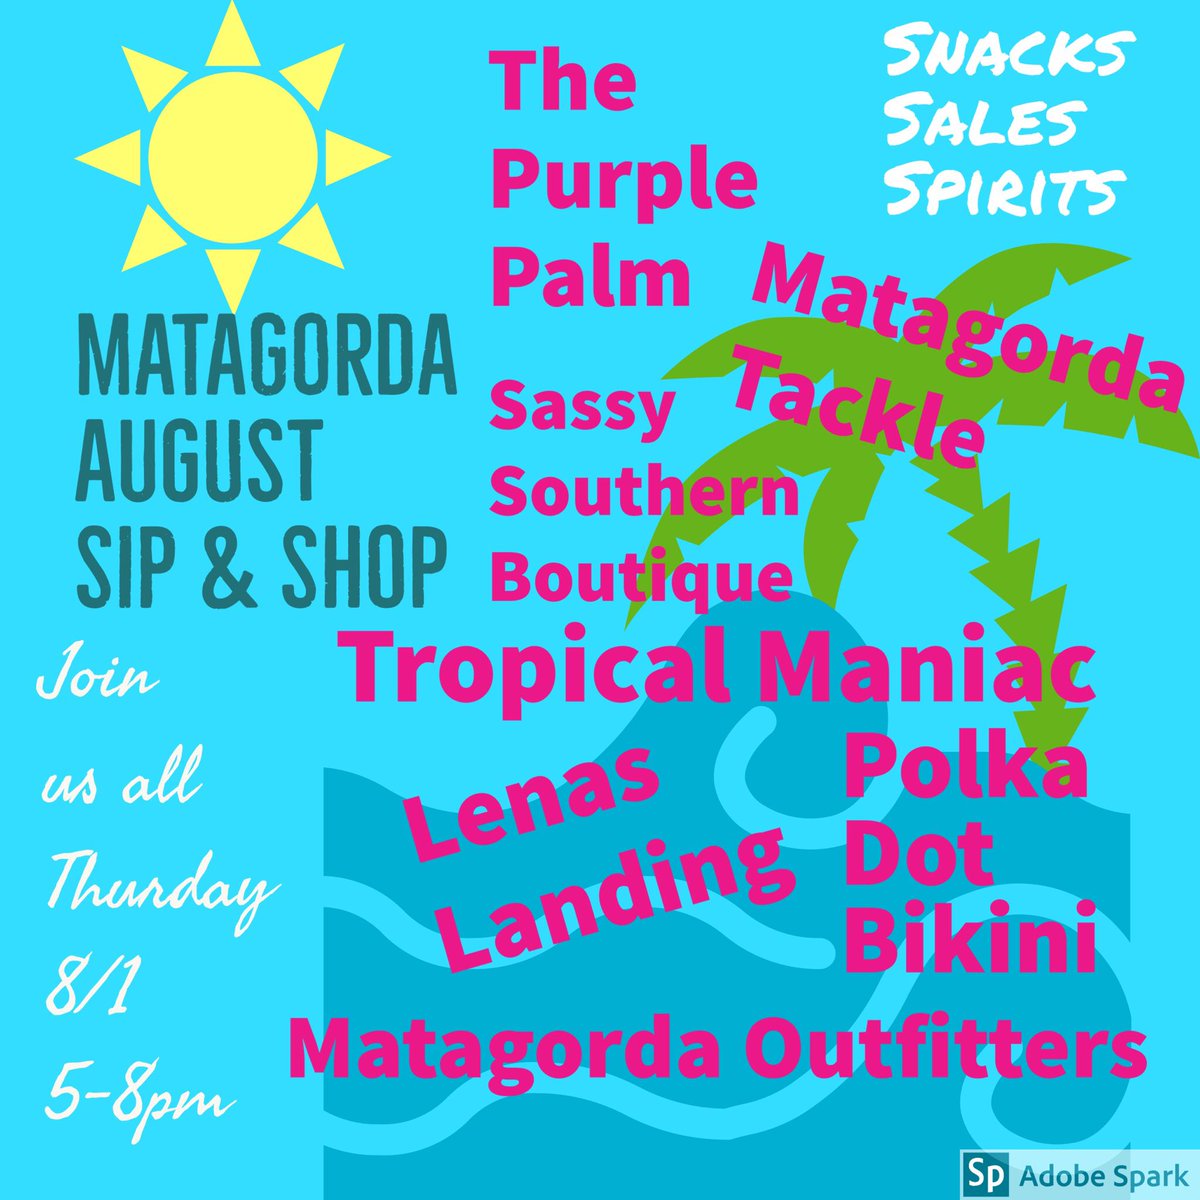 Join us for our next Sip and Shop with your local Matagorda retailers on Thursday, August 1st, from 5-8pm!  Enjoy great snacks, sales, and spirits!  

#tropicalmaniac #thepurplepalm #matagordatackle #sassysouthernboutique #polkadotbikini #lenaslanding #matagordaoutfitters